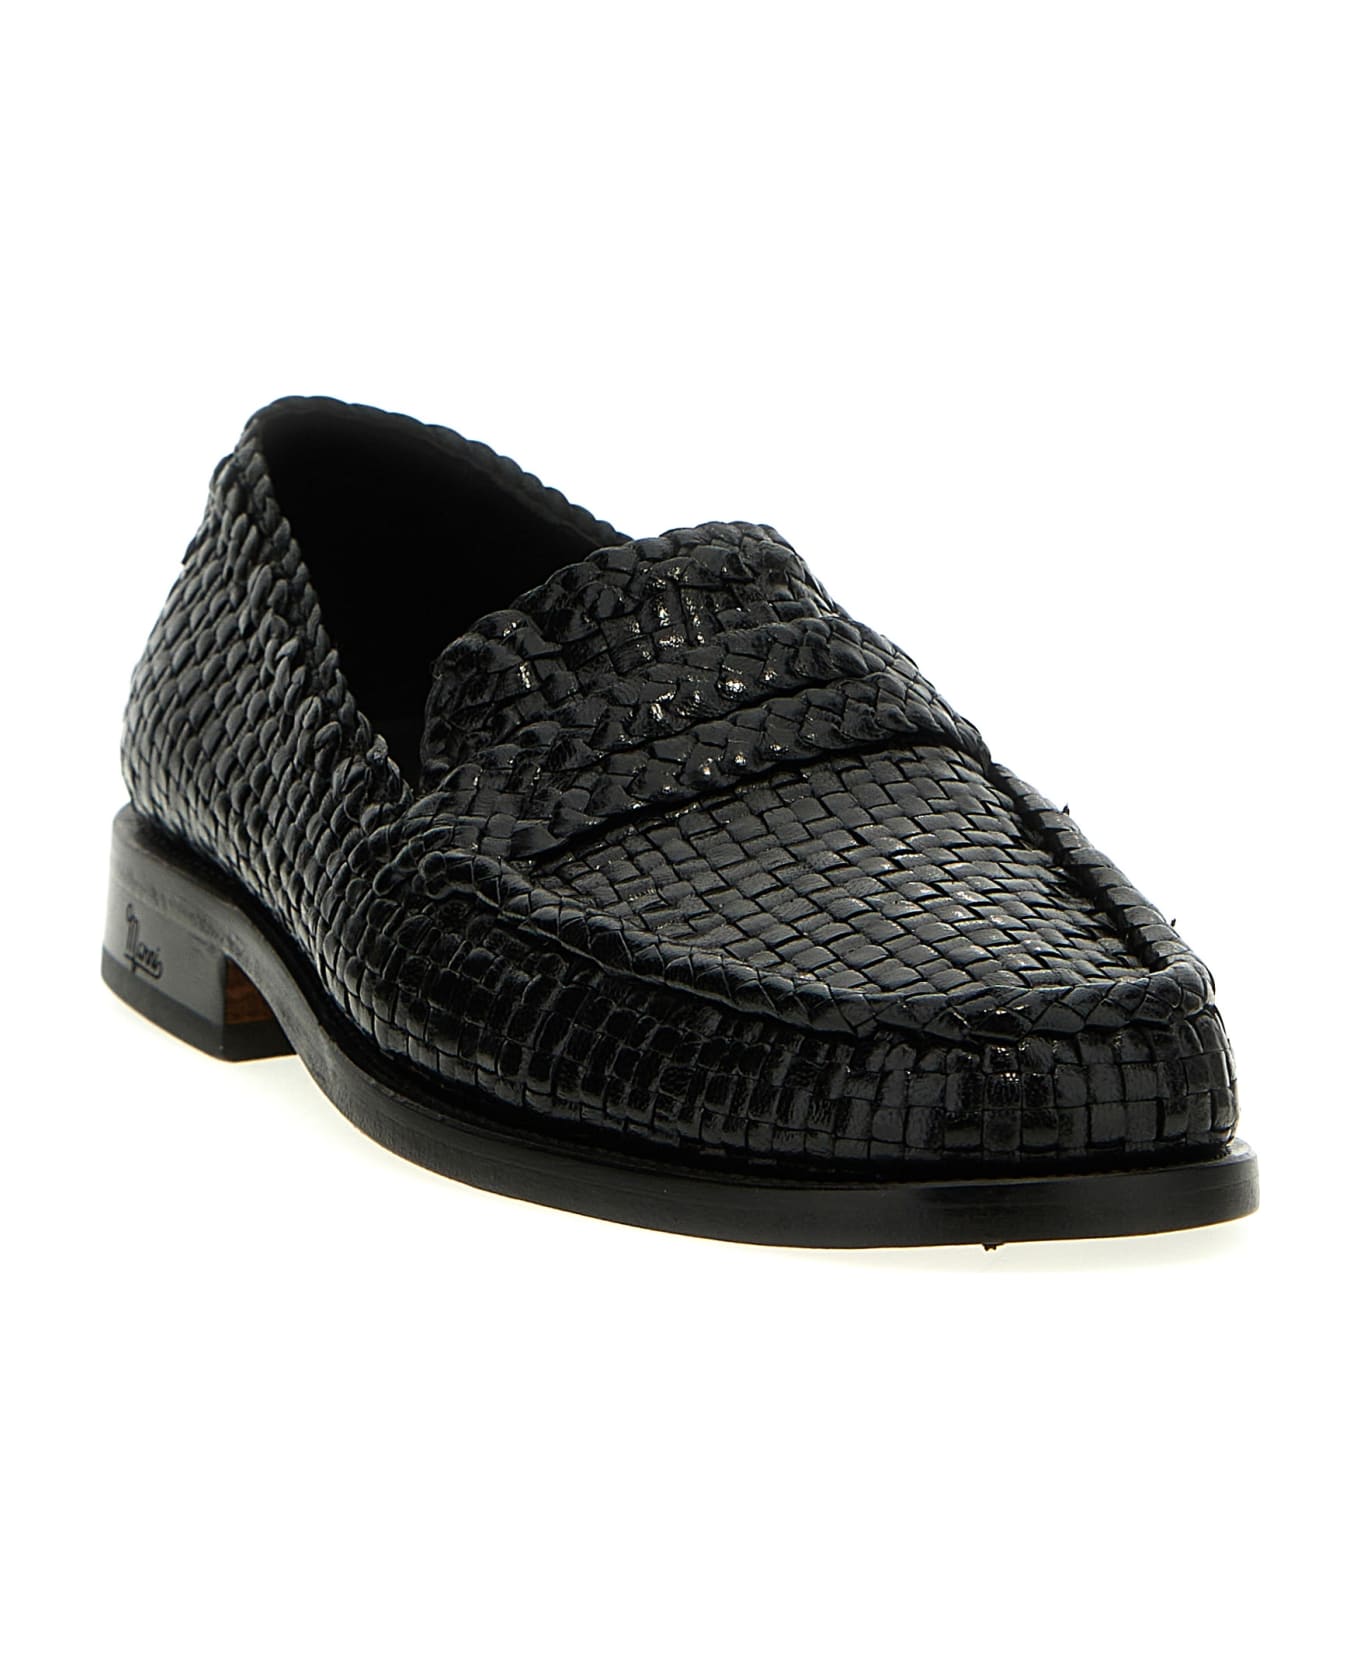 Marni Braided Leather Loafers